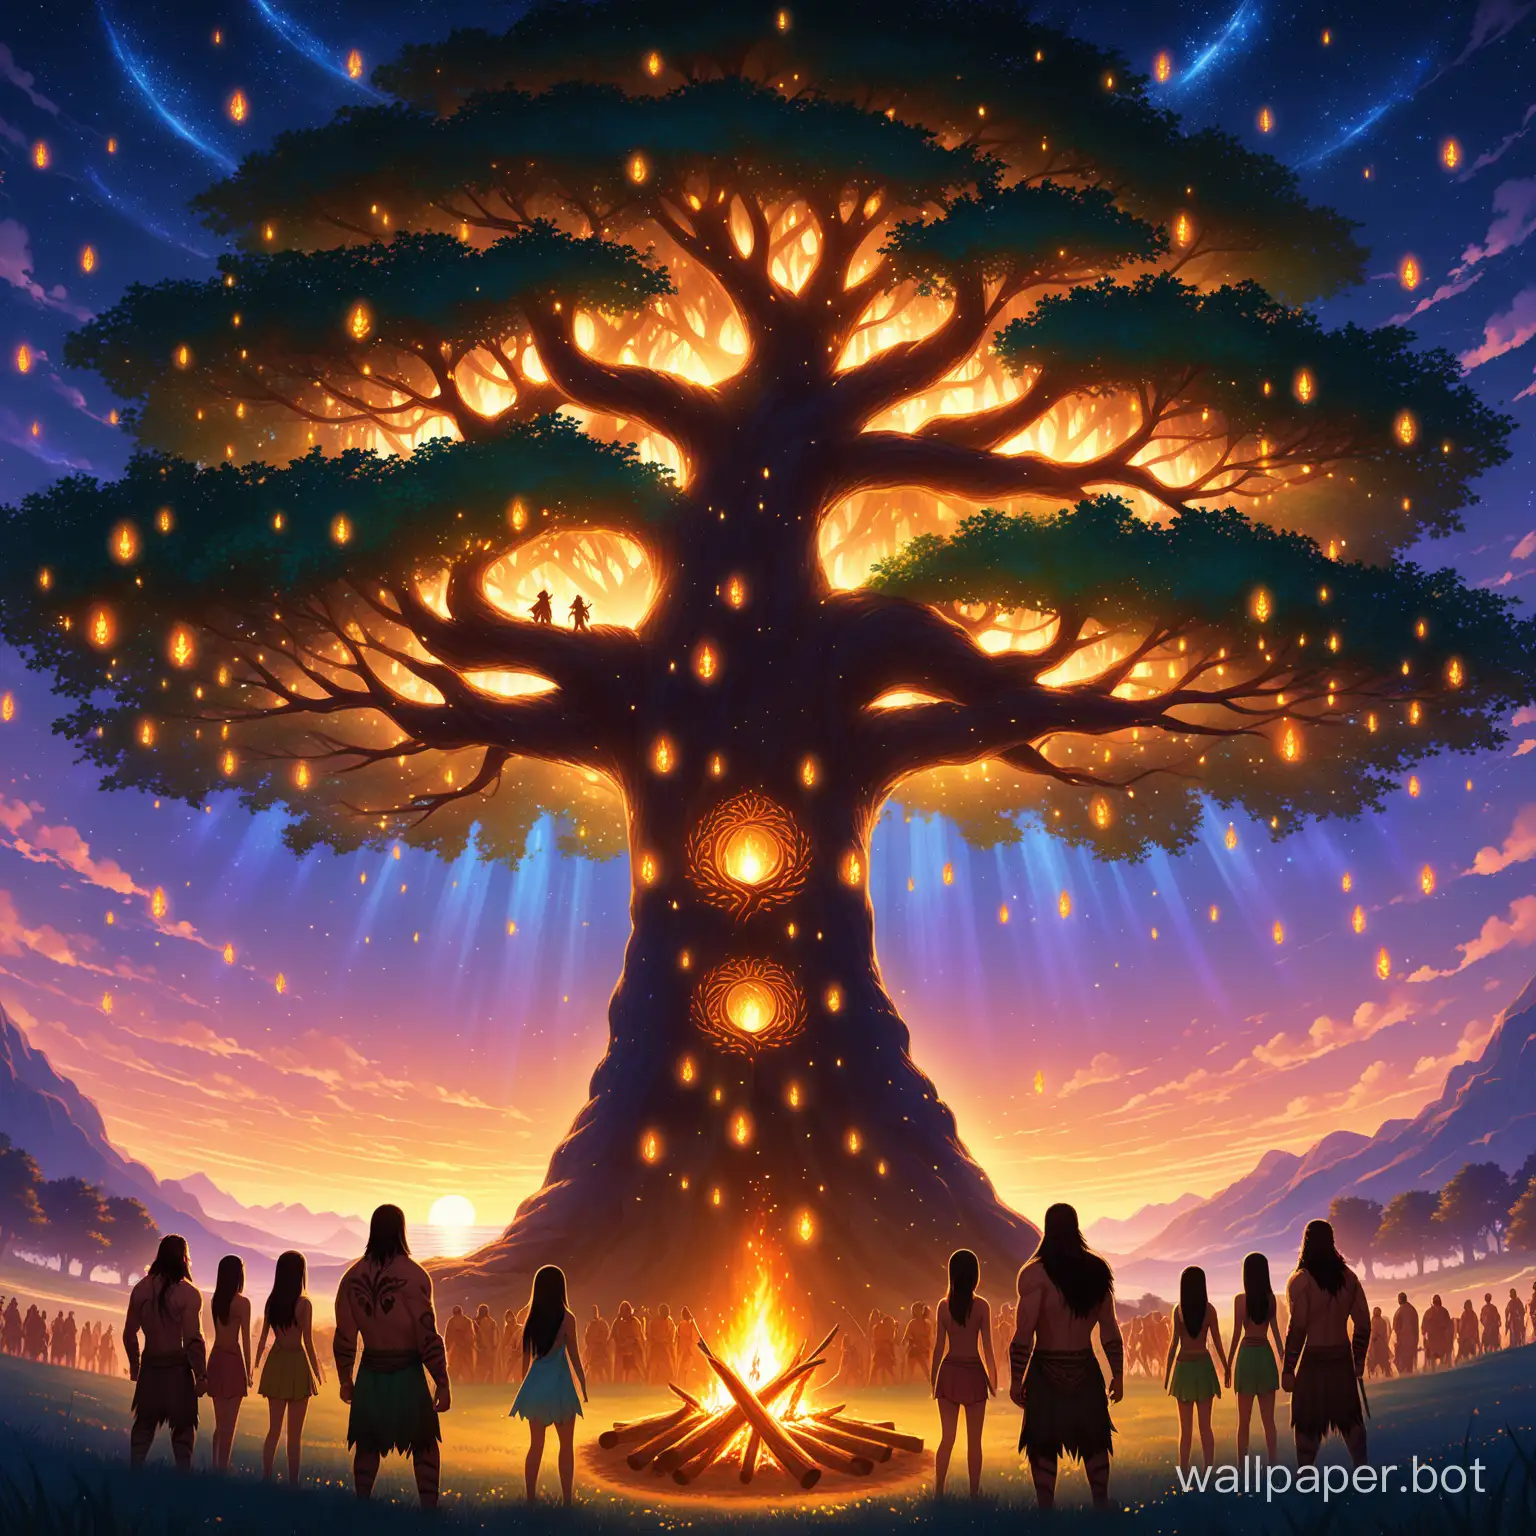 I would like to have wallpaper for ultra wide screen, what contains tree of life in the middle. Around the tree are fairies , humans and berserkers . It is almost night and only lights is coming from sunset and lighted bonfire. Picture format should be  3440x1440 pixels.